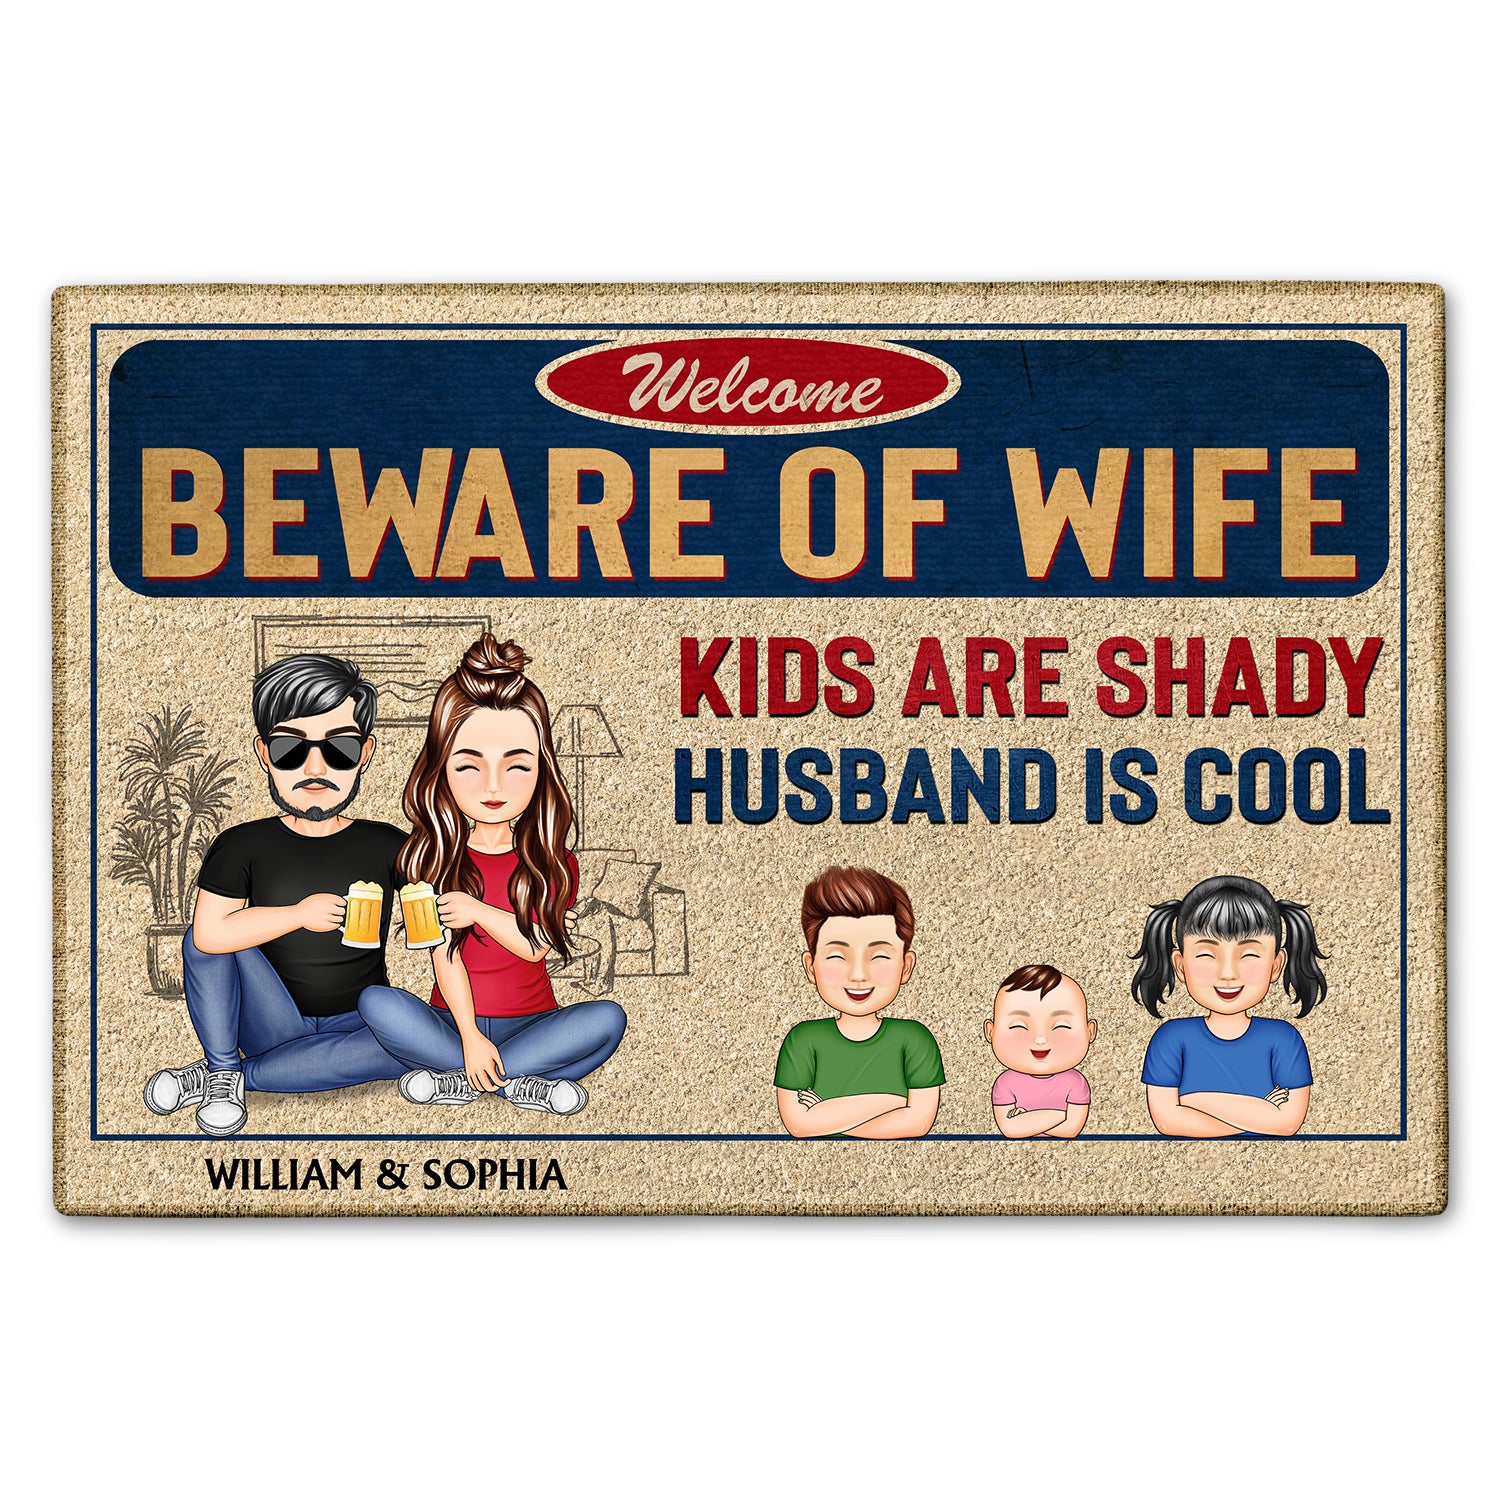 Beware Of Wife Kids Are Shady Husband Is Cool - Anniversary, Birthday, Home Decor Gift For Husband, Wife, Couple - Personalized Custom Doormat